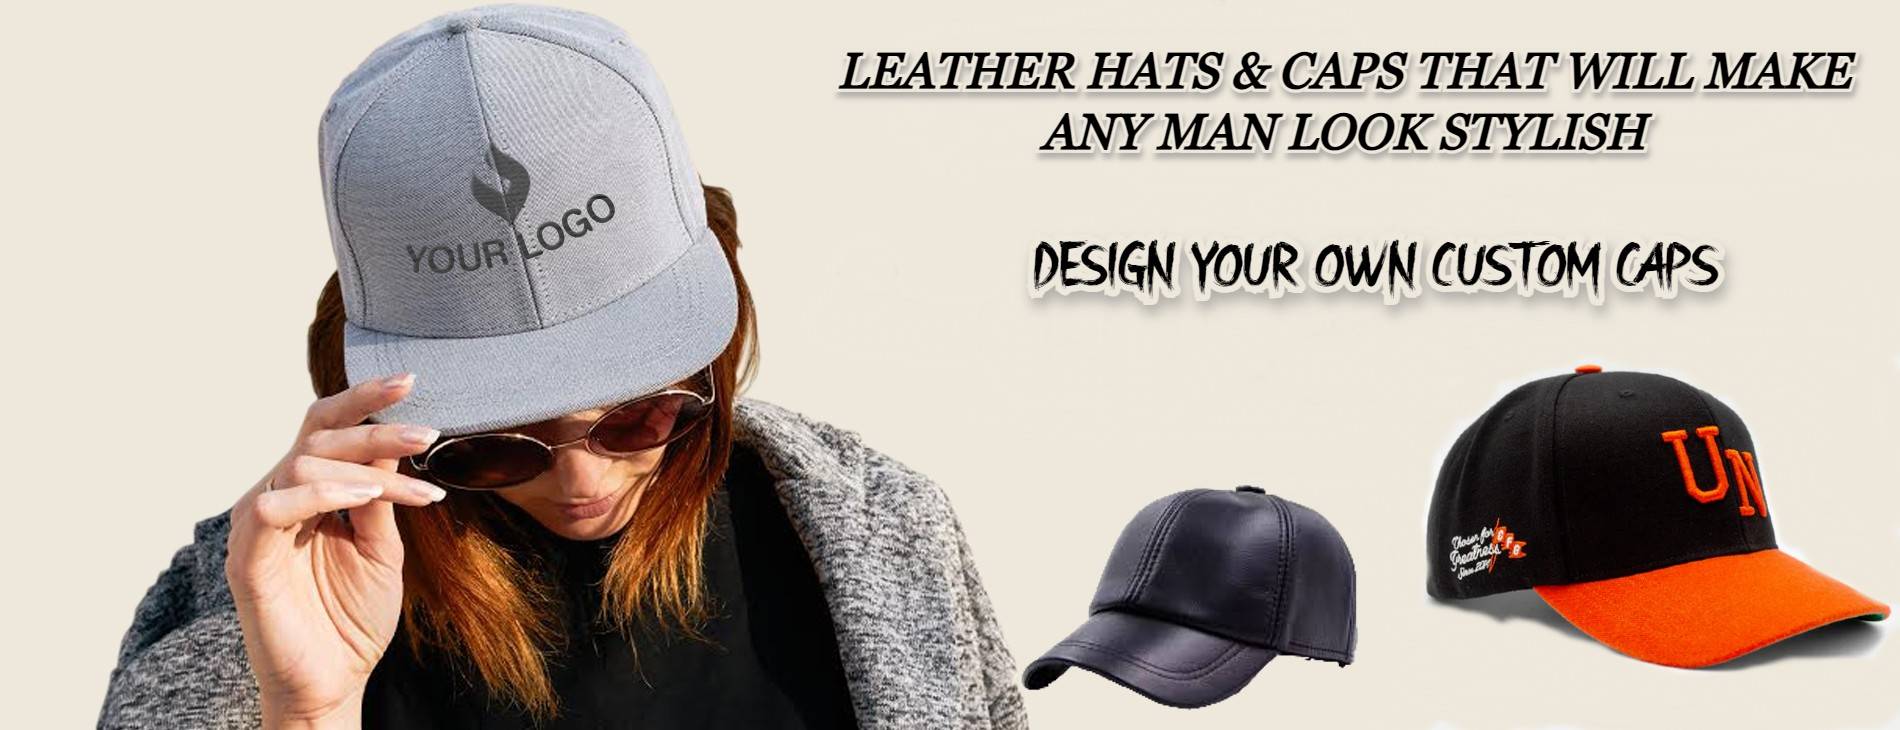 Leather Hats & Caps That Perfect For Modern Man On The Move